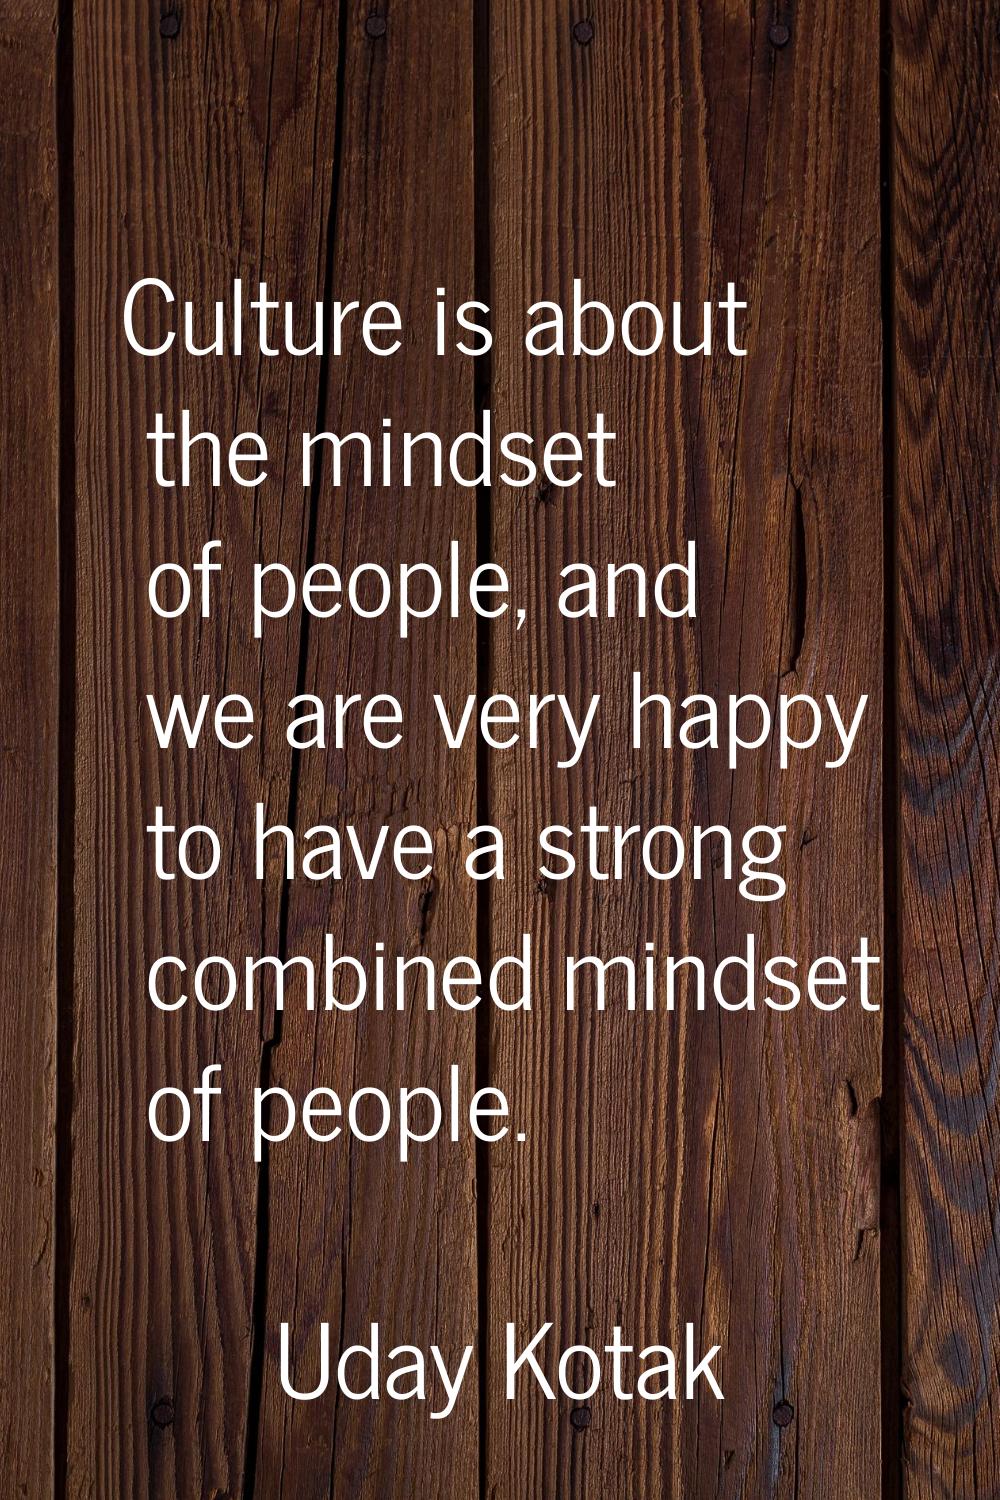 Culture is about the mindset of people, and we are very happy to have a strong combined mindset of 